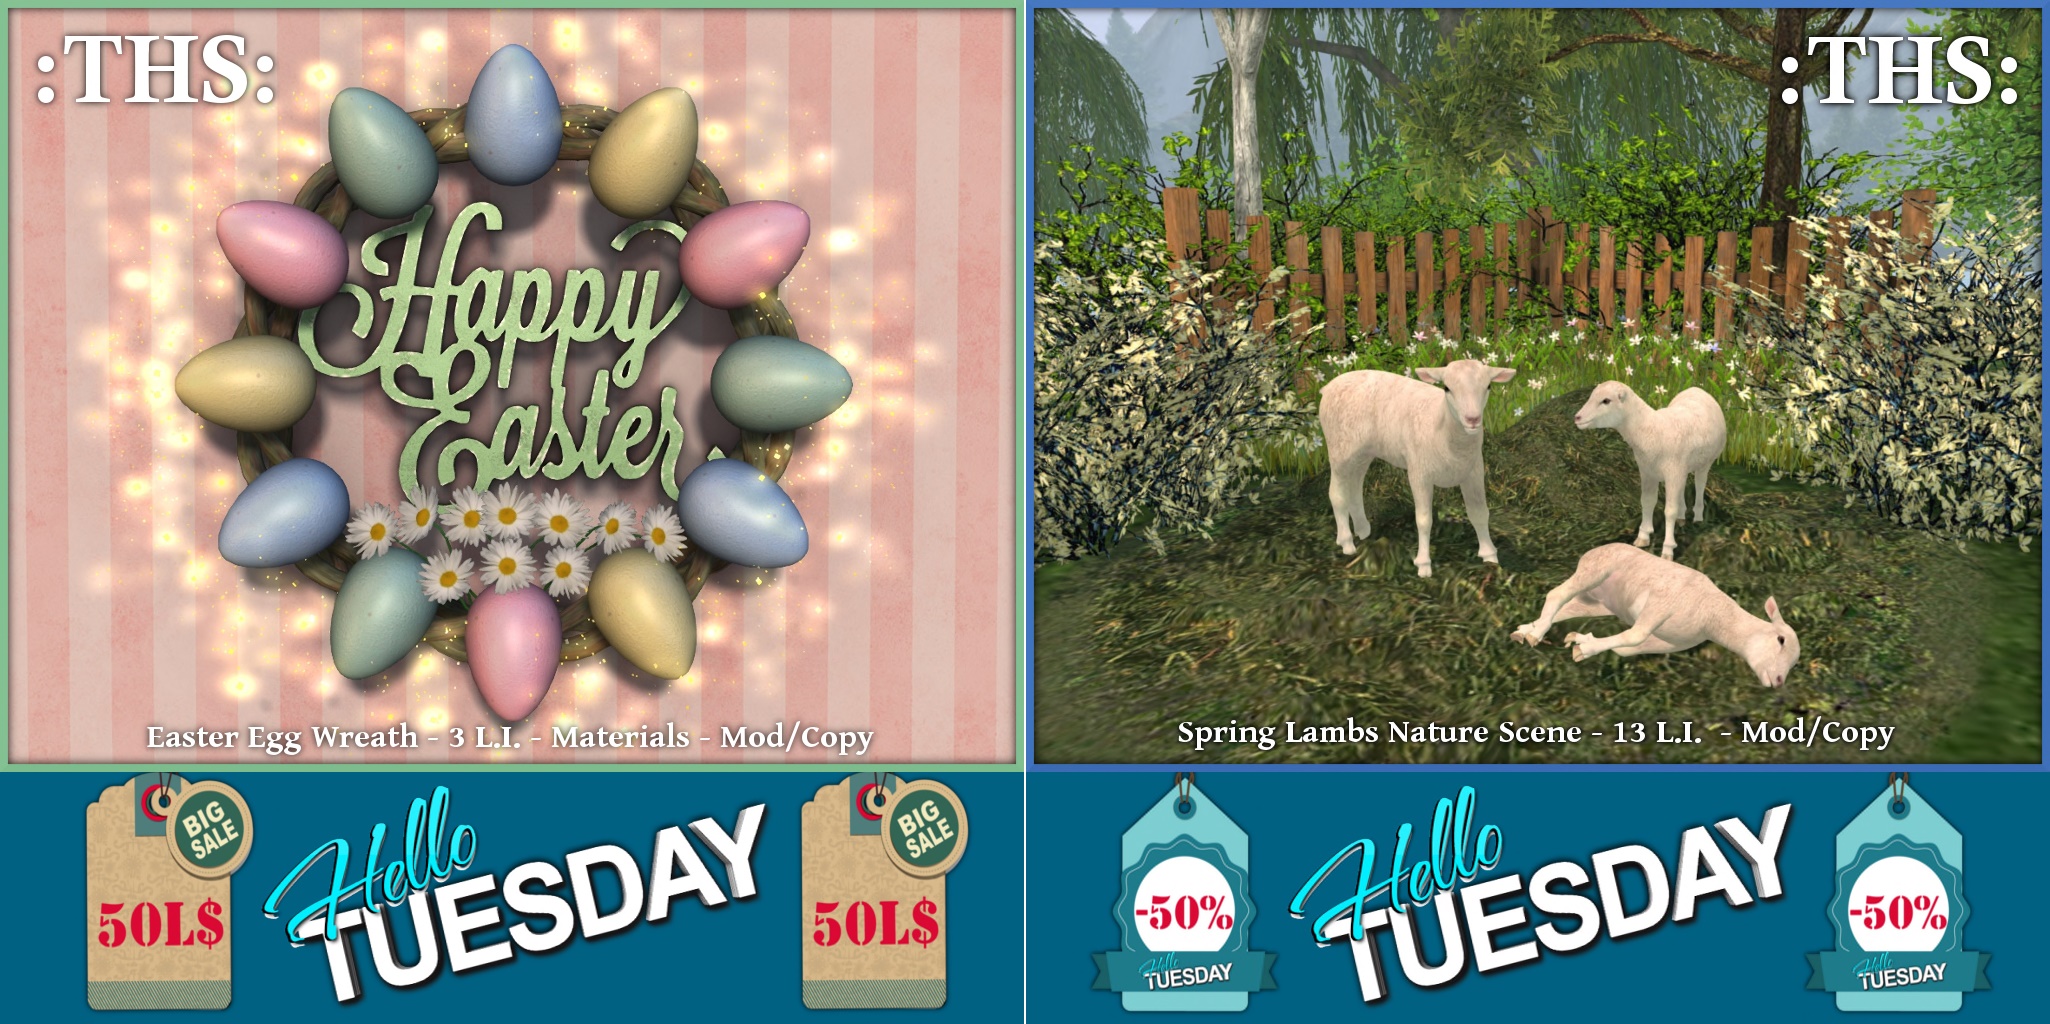 The Home Store – Easter Egg Wreath & Spring Lambs Nature Scene